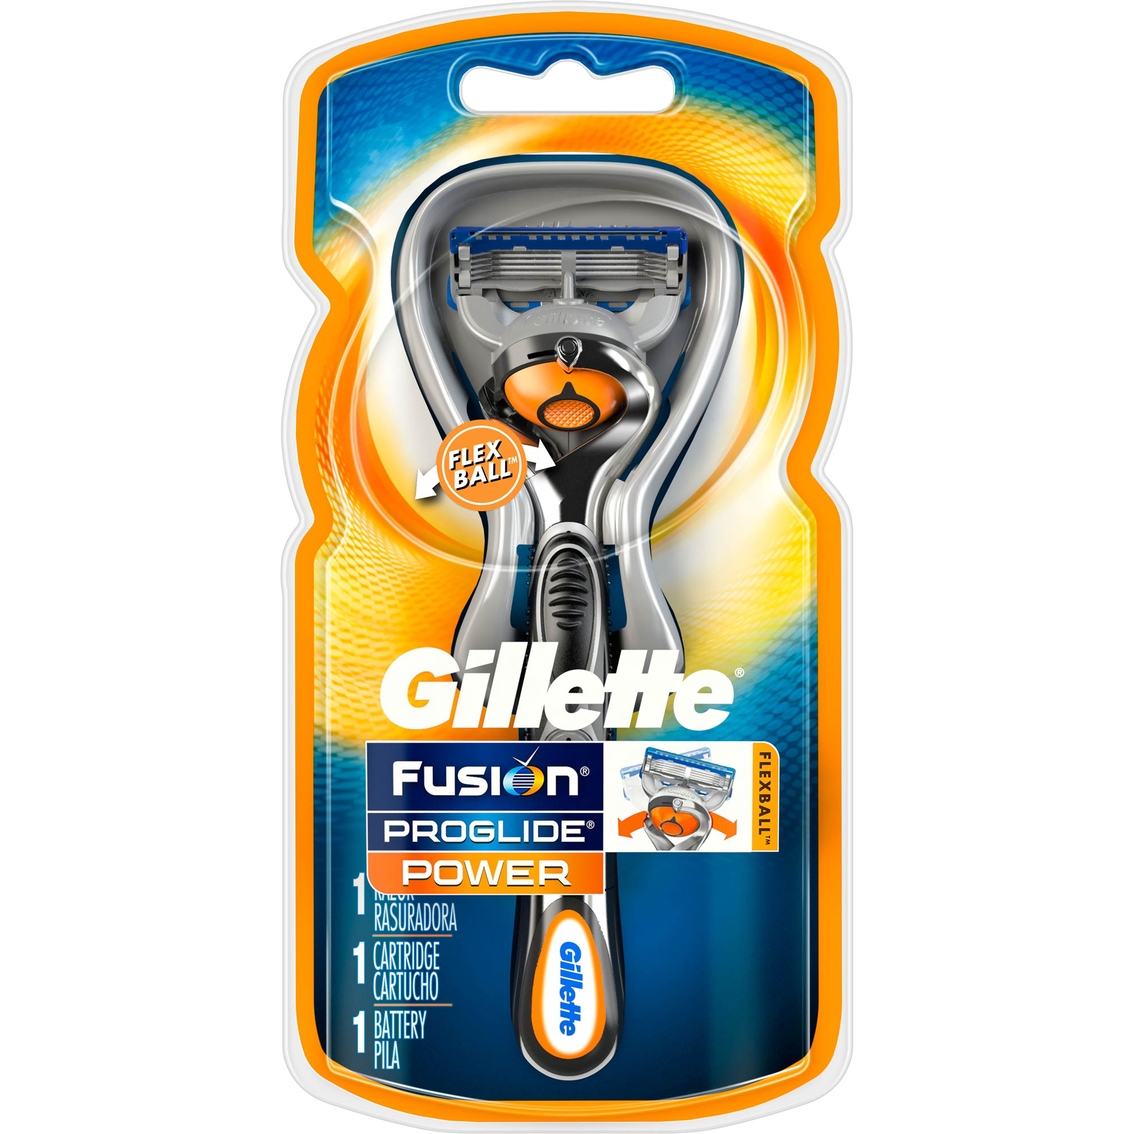 Gillette Fusion Proglide Power Razor With Flexball Handle Technology Razors Beauty And Health